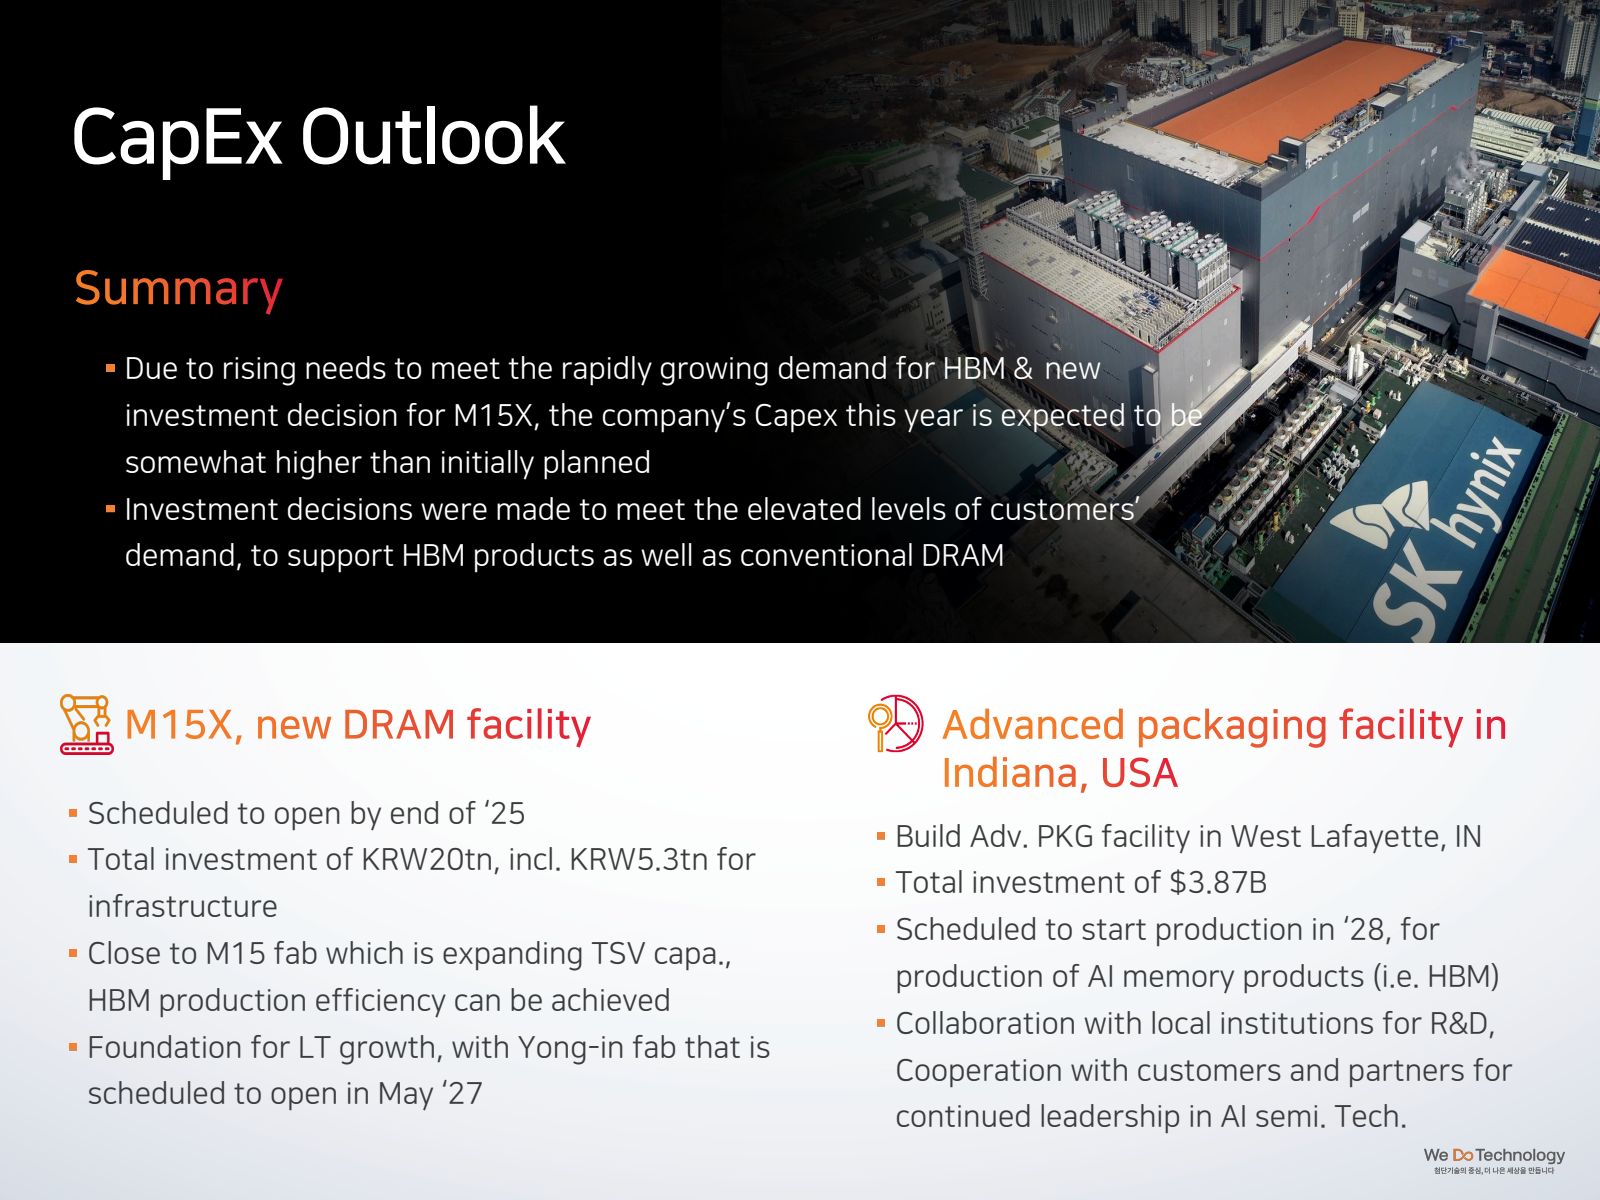 CapEx Outlook 

Summ